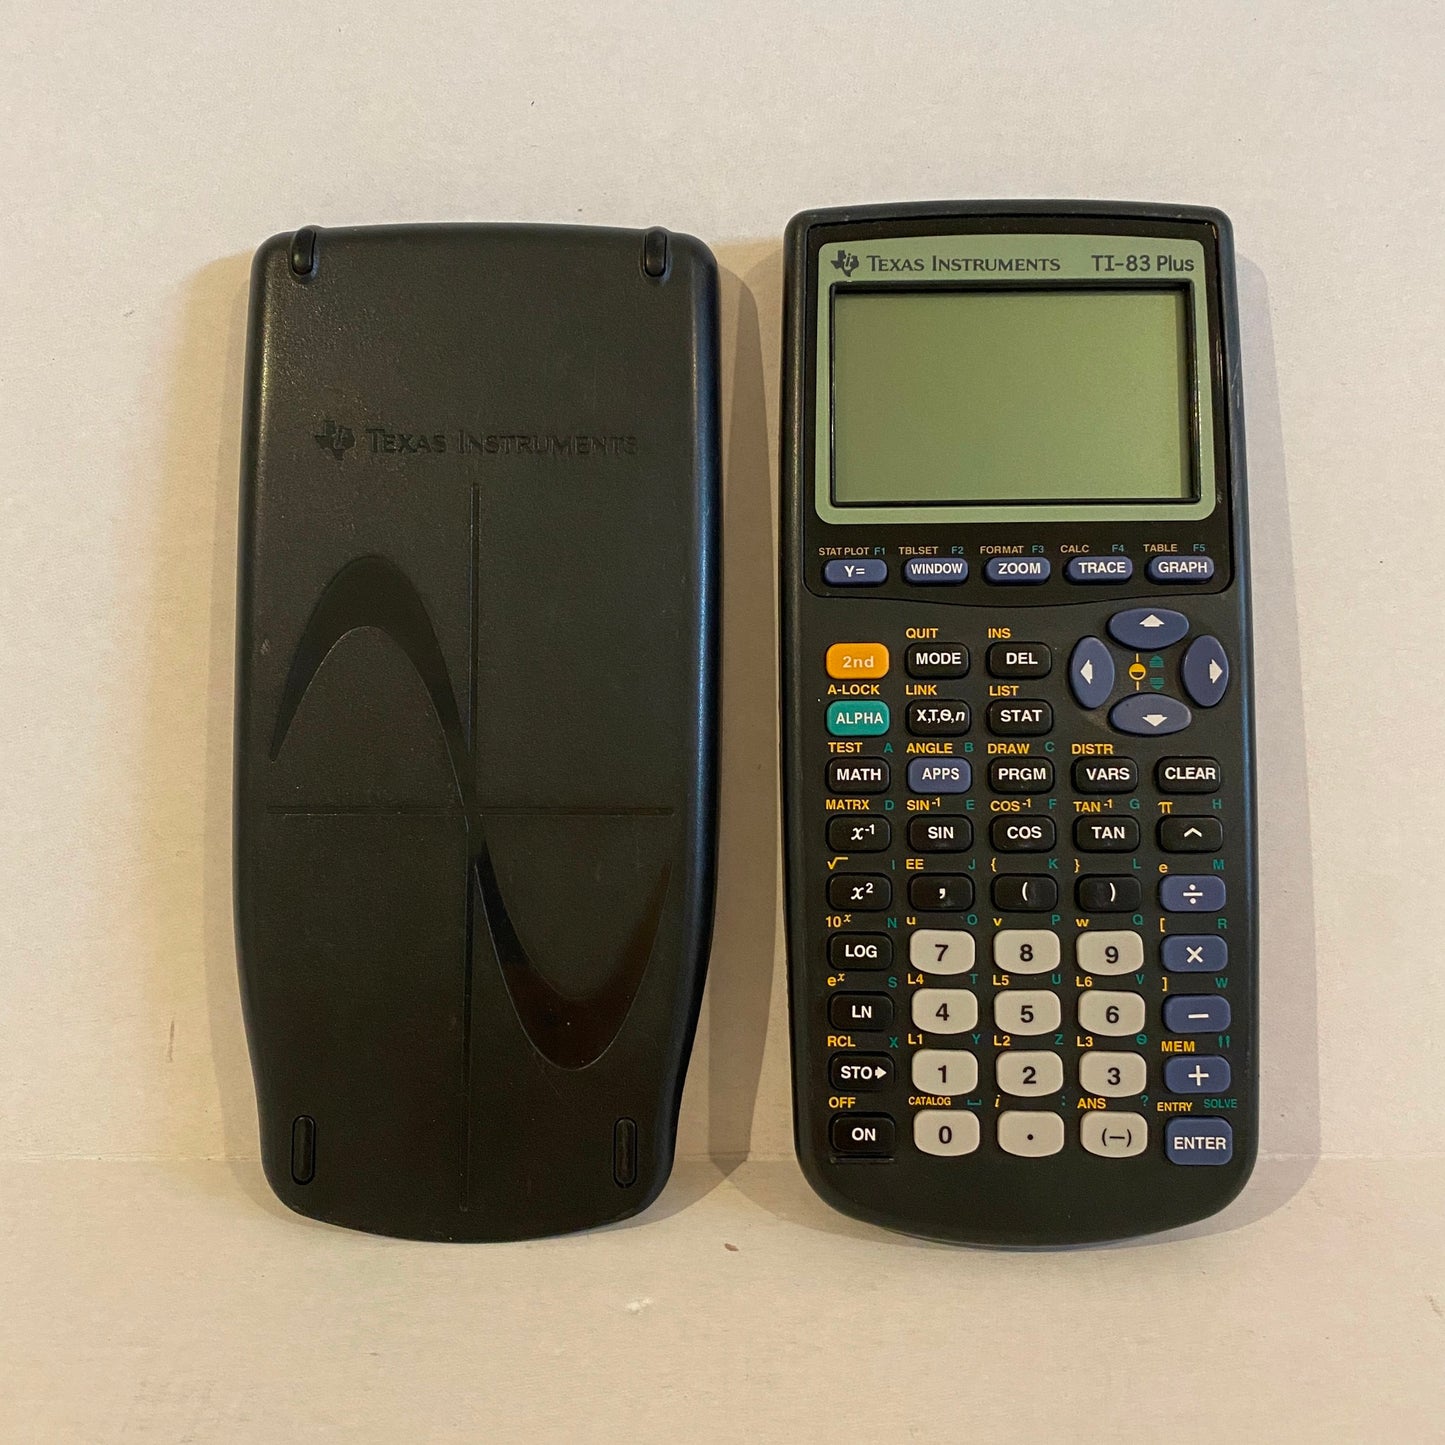 Texas Instruments Graphing Calculator - TI-83 Plus